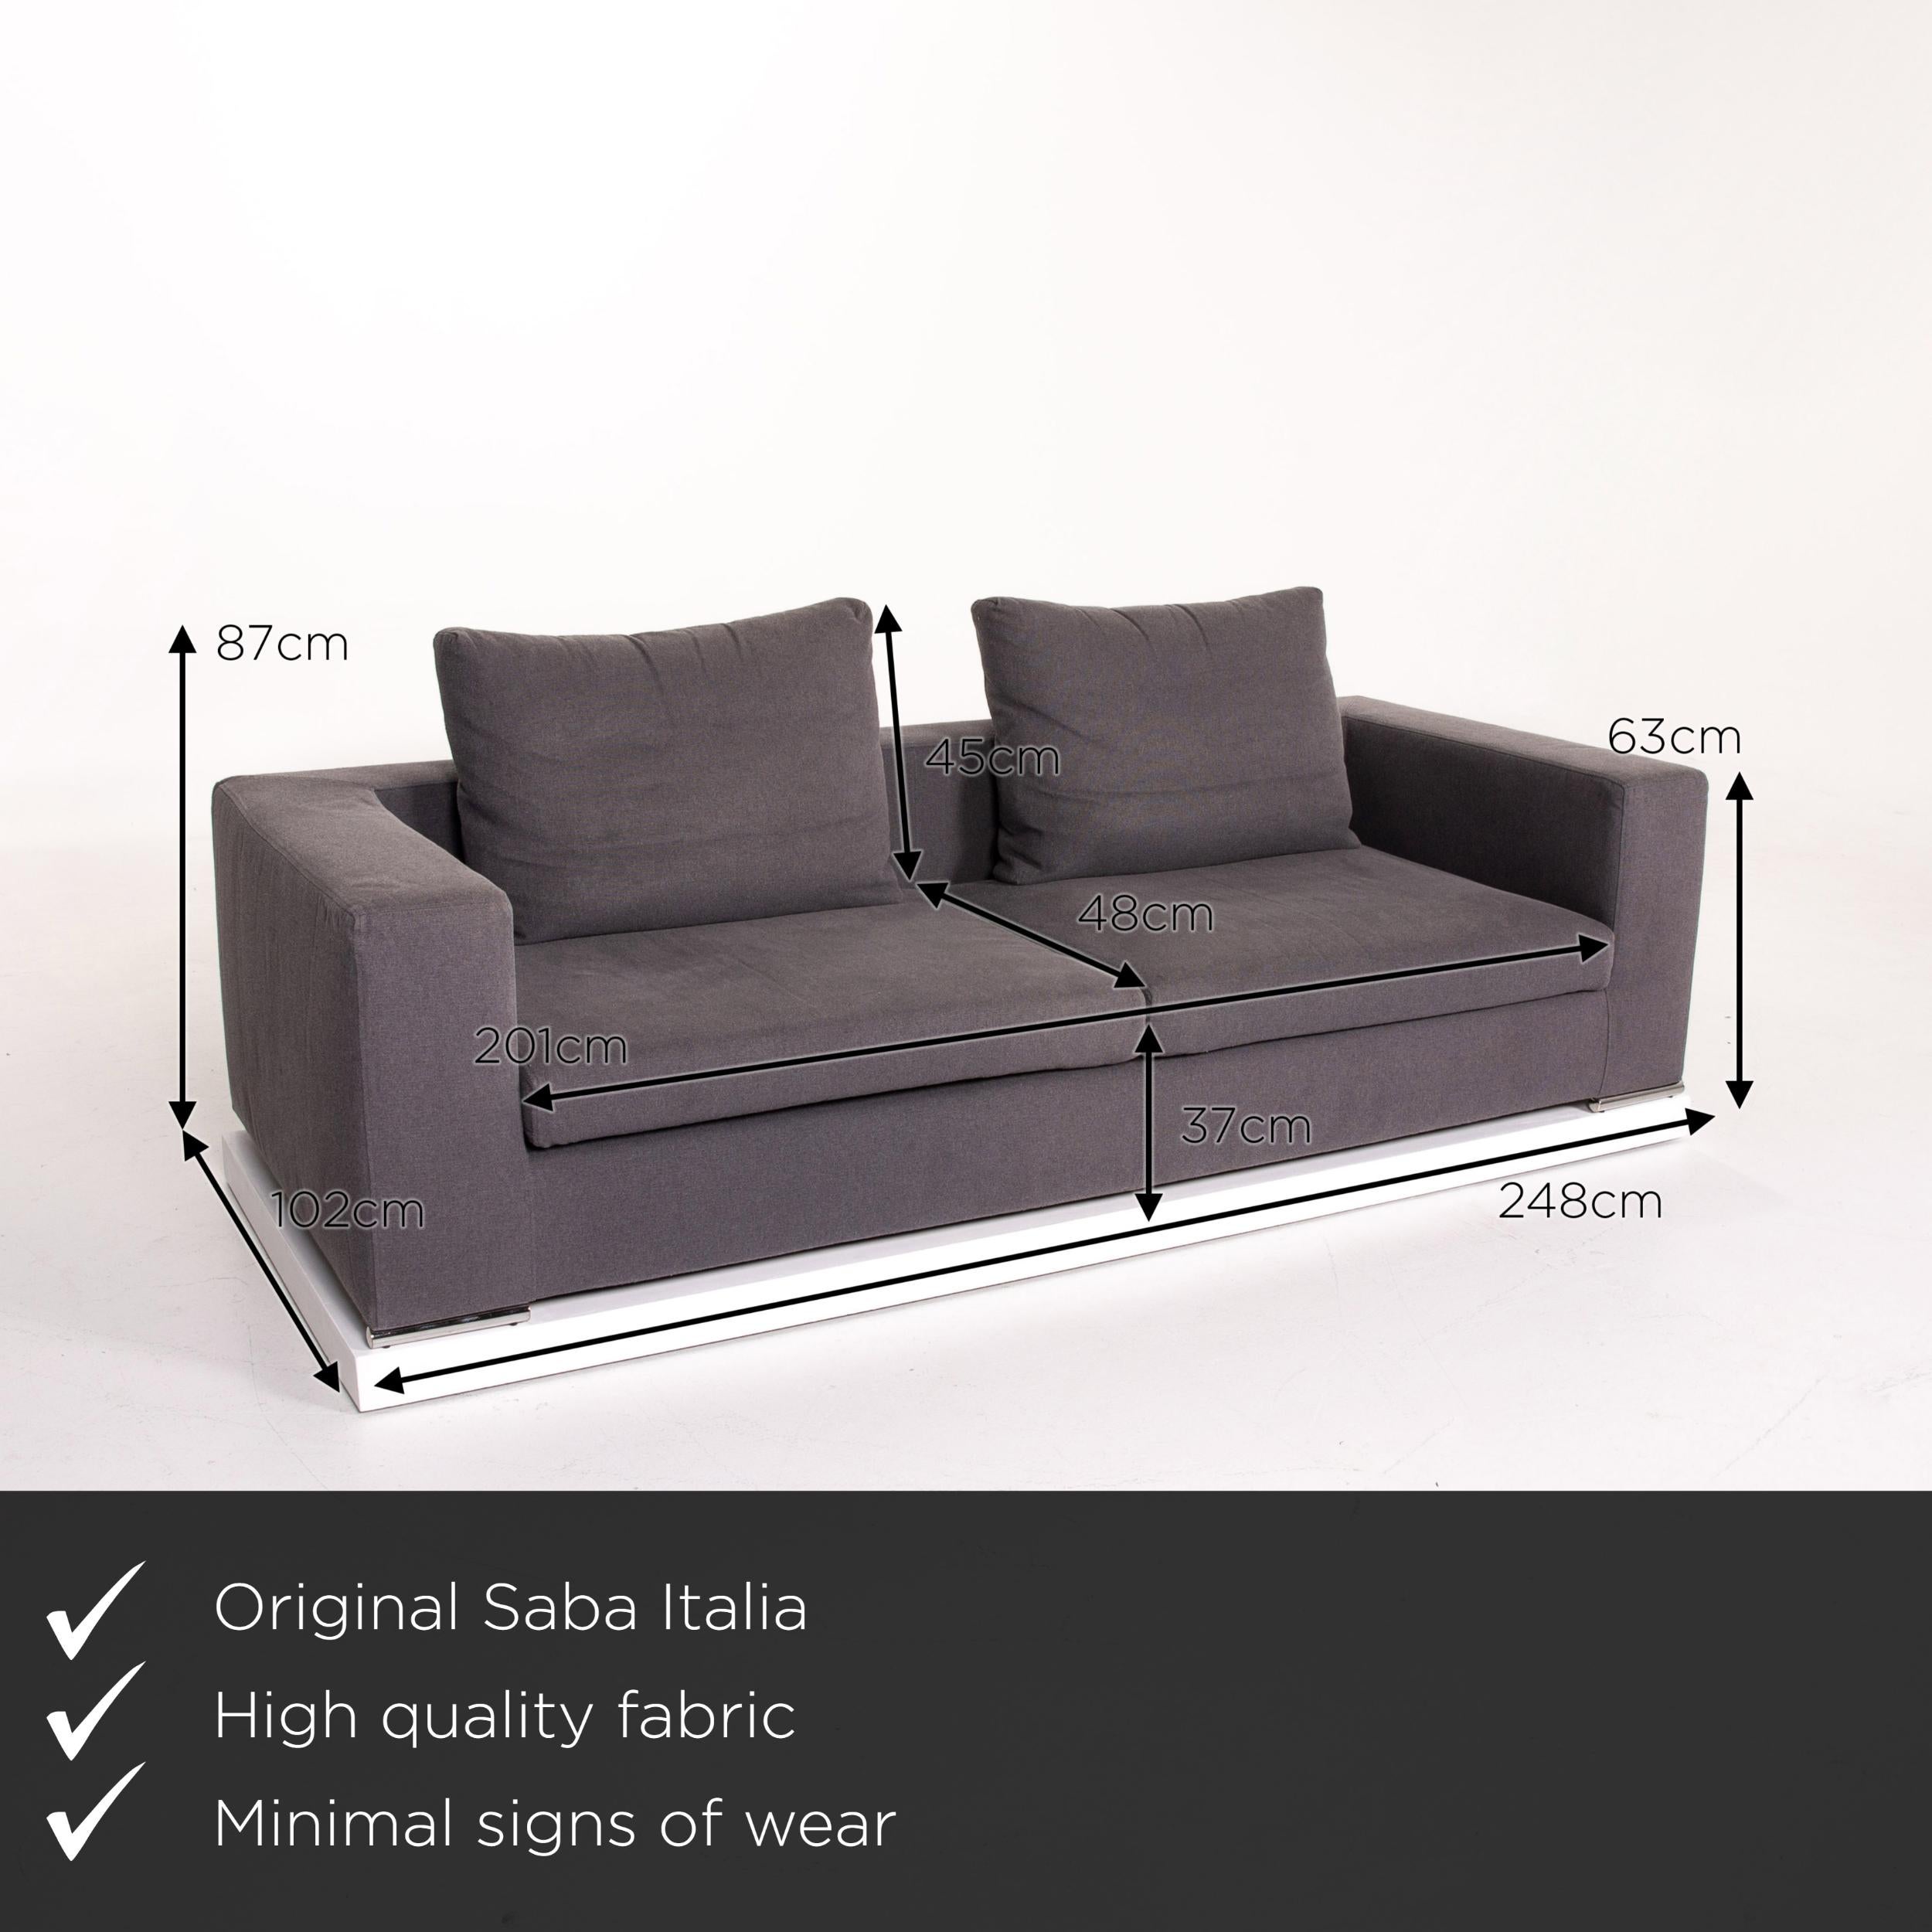 We present to you a Saba Italia fabric sofa gray two-seat couch.

 

 Product measurements in centimeters:
 

Depth 102
Width 248
Height 87
Seat height 37
Rest height 63
Seat depth 48
Seat width 201
Back height 45.